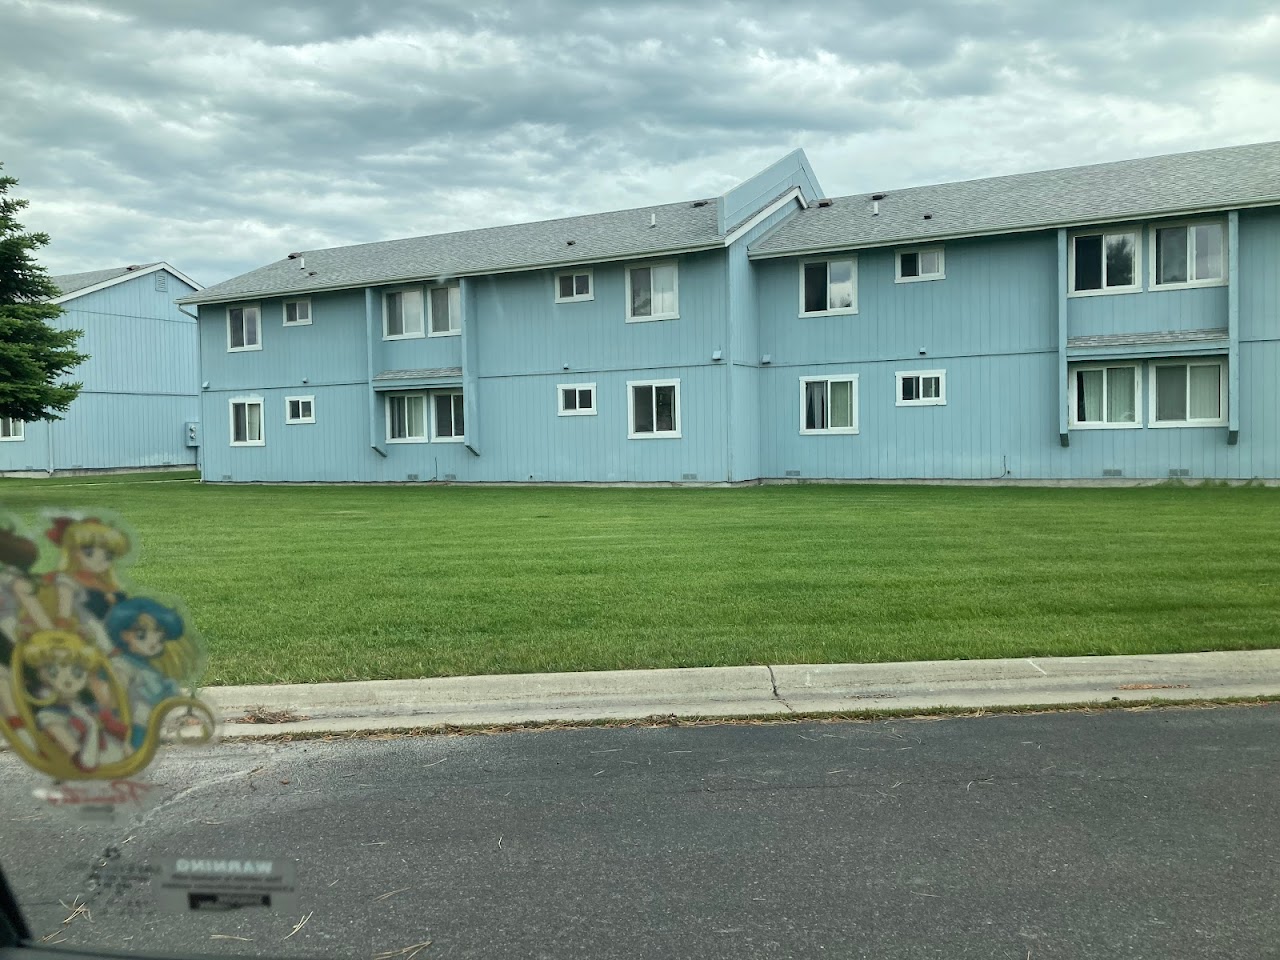 Photo of WESTWIND VILLAGE APARTMENTS. Affordable housing located at 206 COOPER LANE KALISPELL, MT 59901